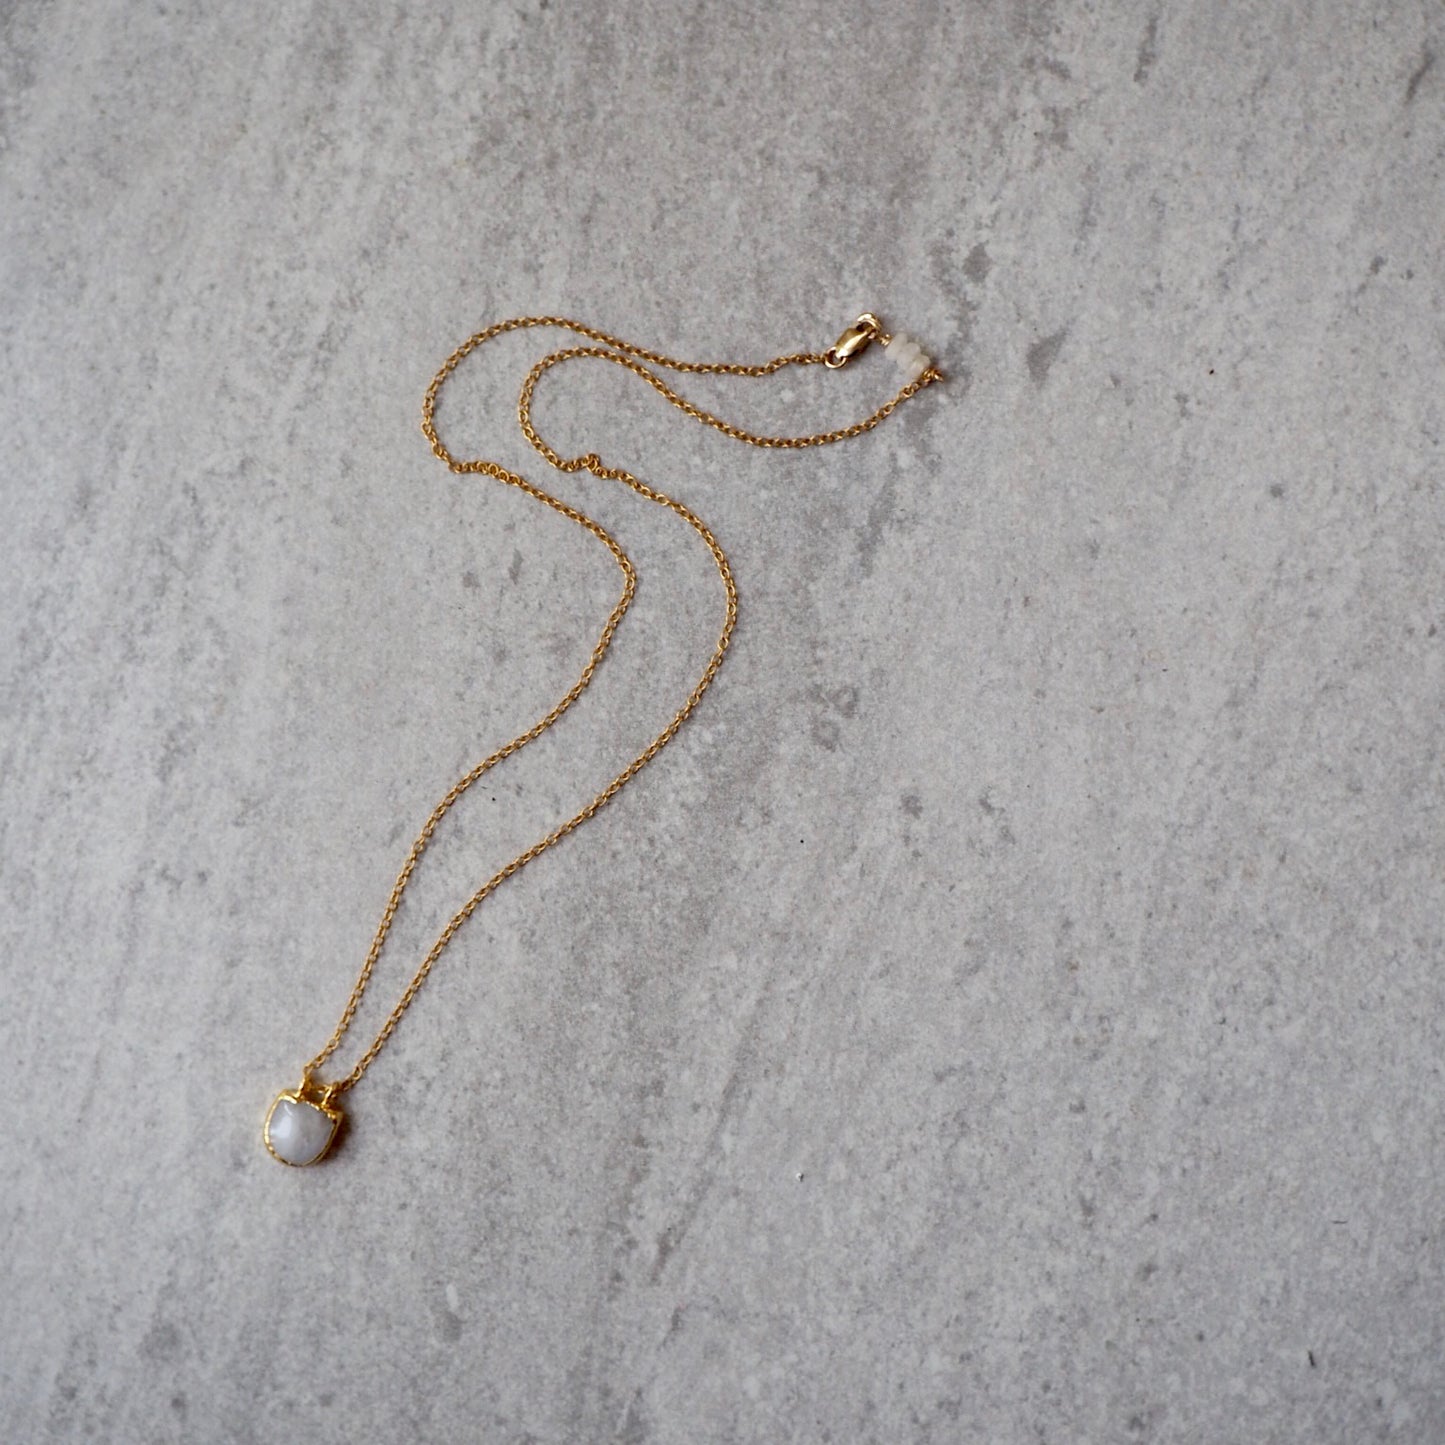 Delicate gold chain necklace with Moonstone by Wallis Designs